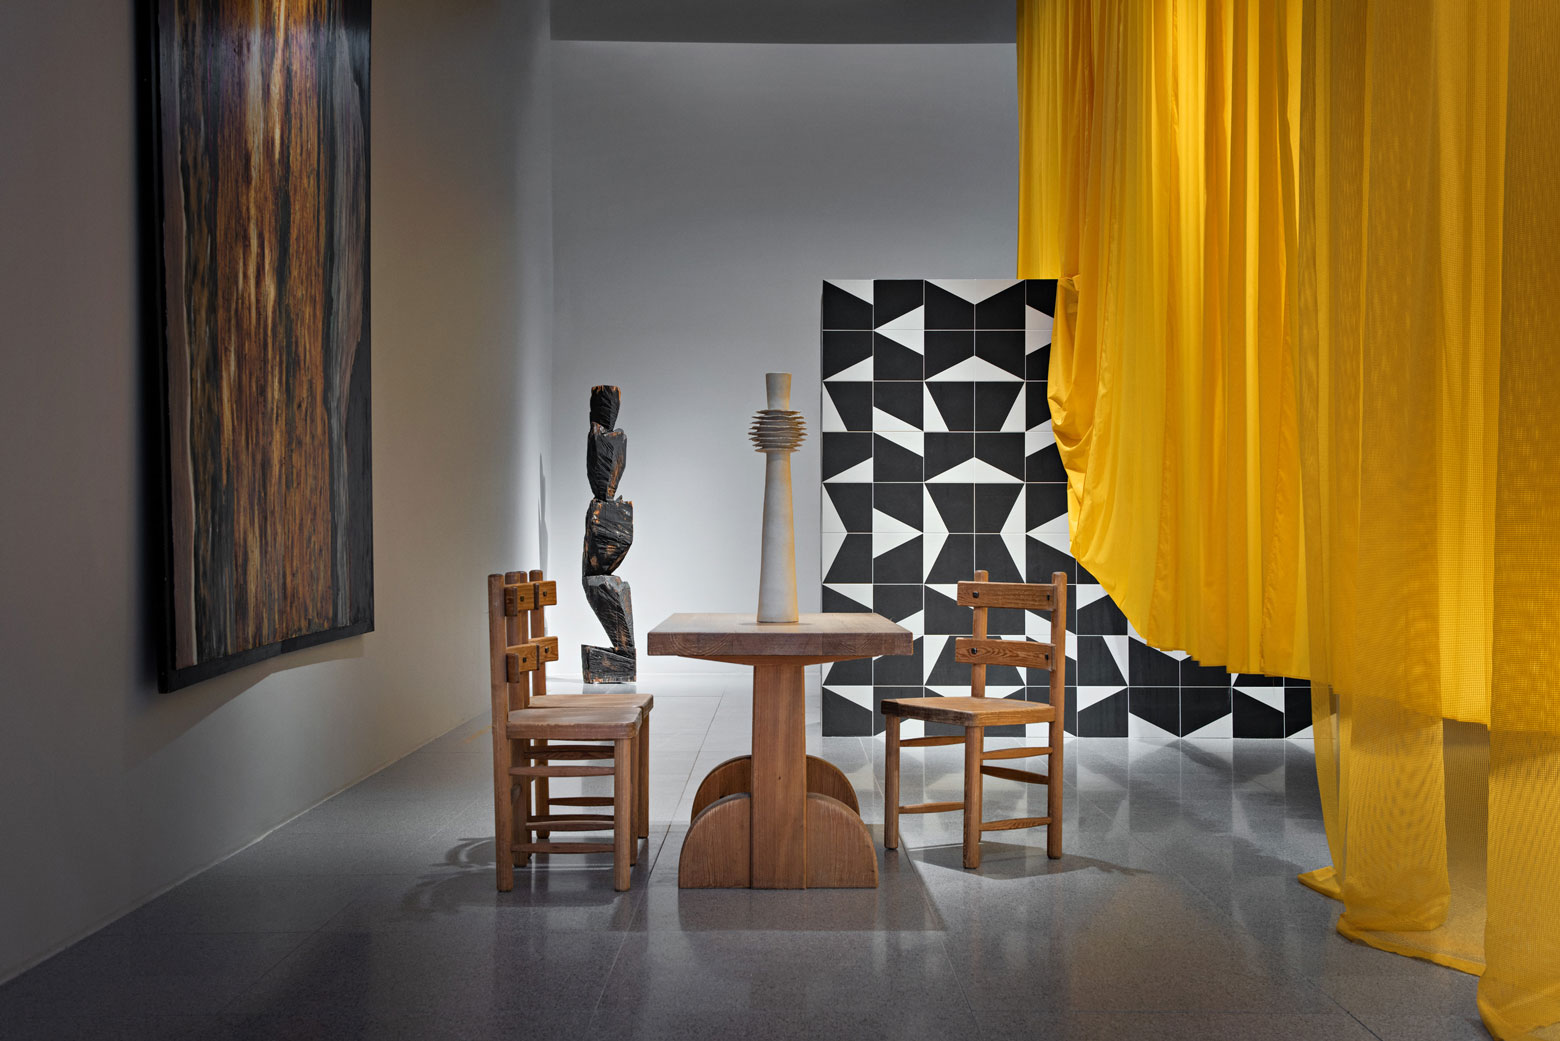 Vibia - The Edit - Note - Evocative Installation at the Stockholm Design Week